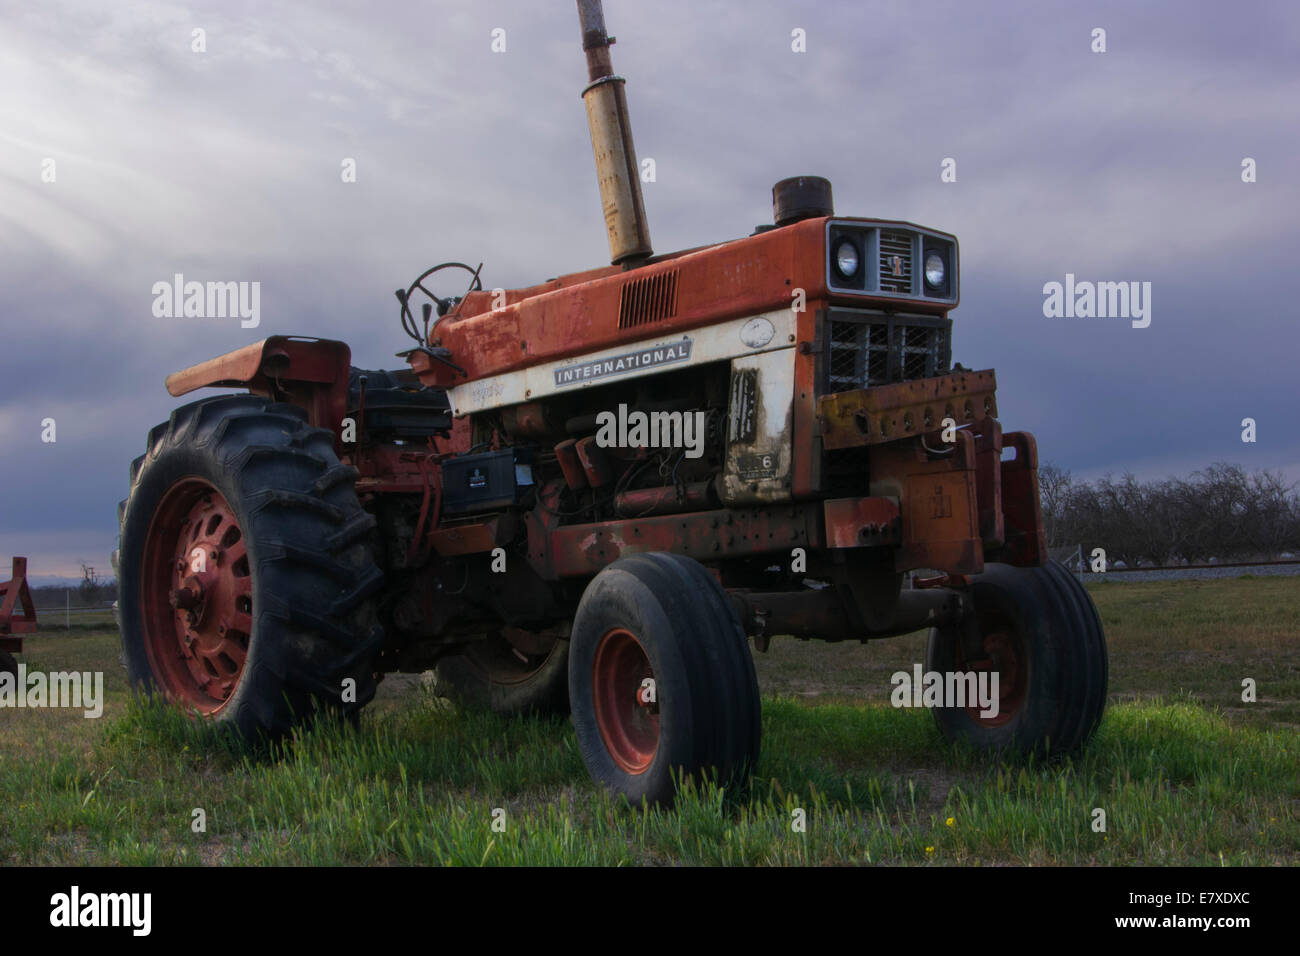 A international tractor with a field and orchard in the background. Stock Photo